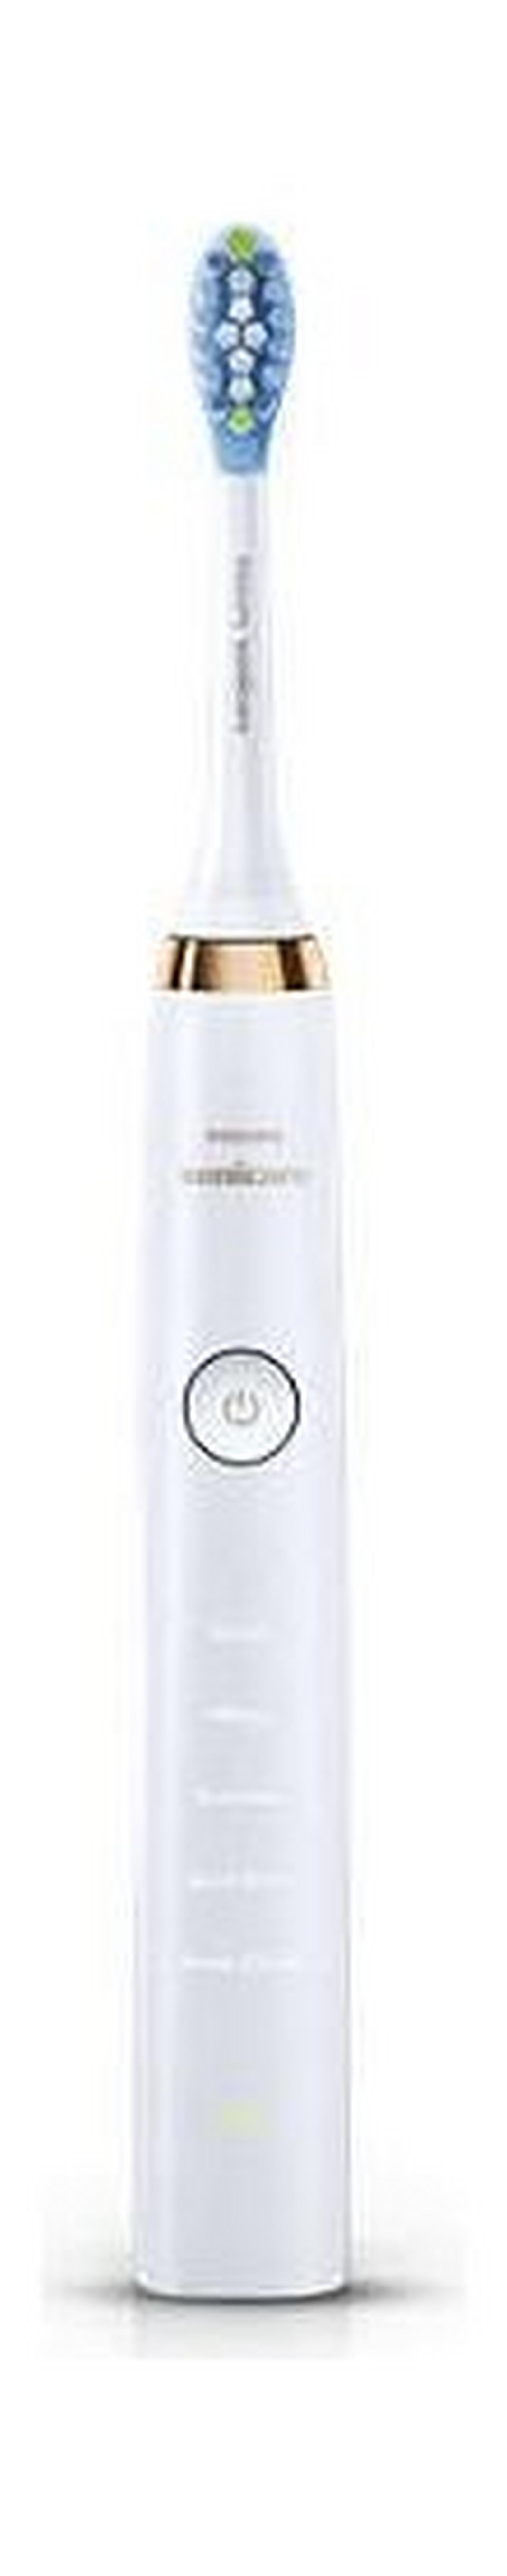 Philips Sonicare DiamondClean Electric Toothbrush - Rose Gold